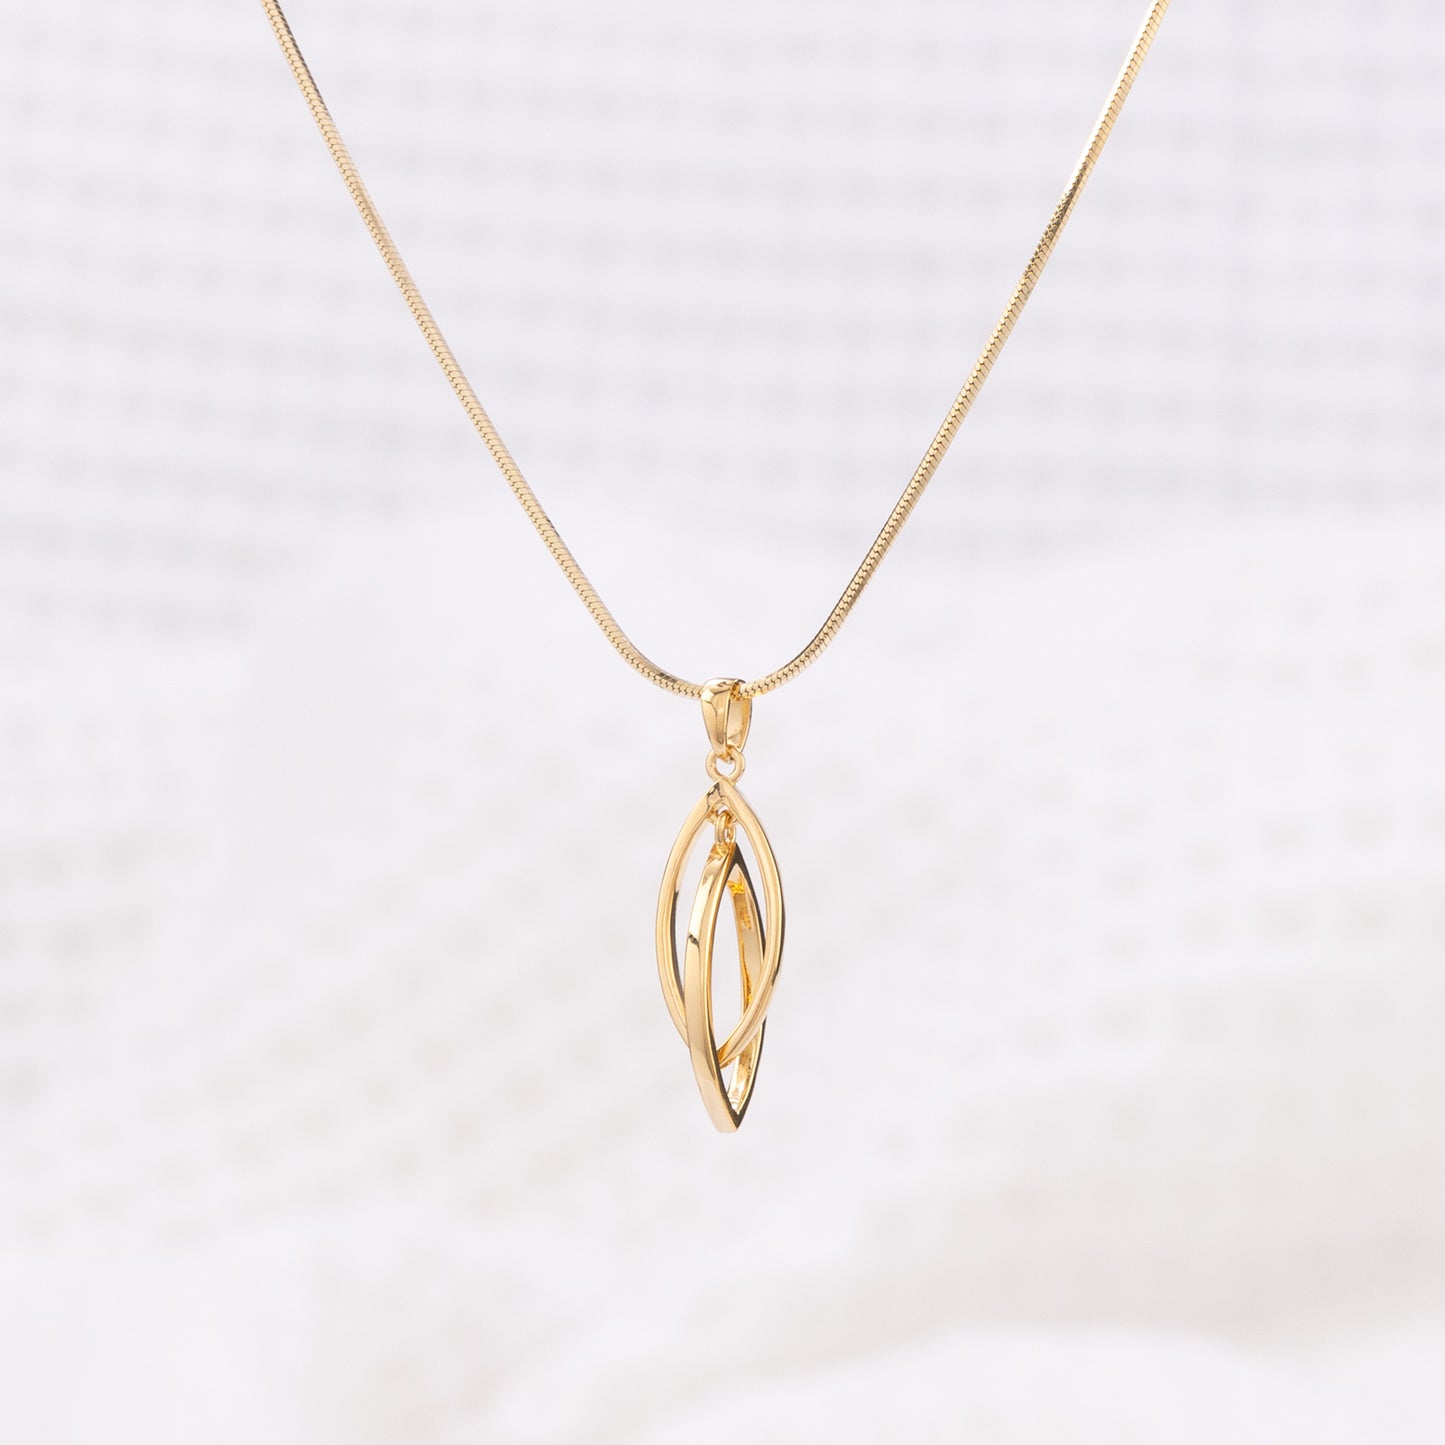 Gold Vermeil Pendant Necklace with Two Intertwining Shapes